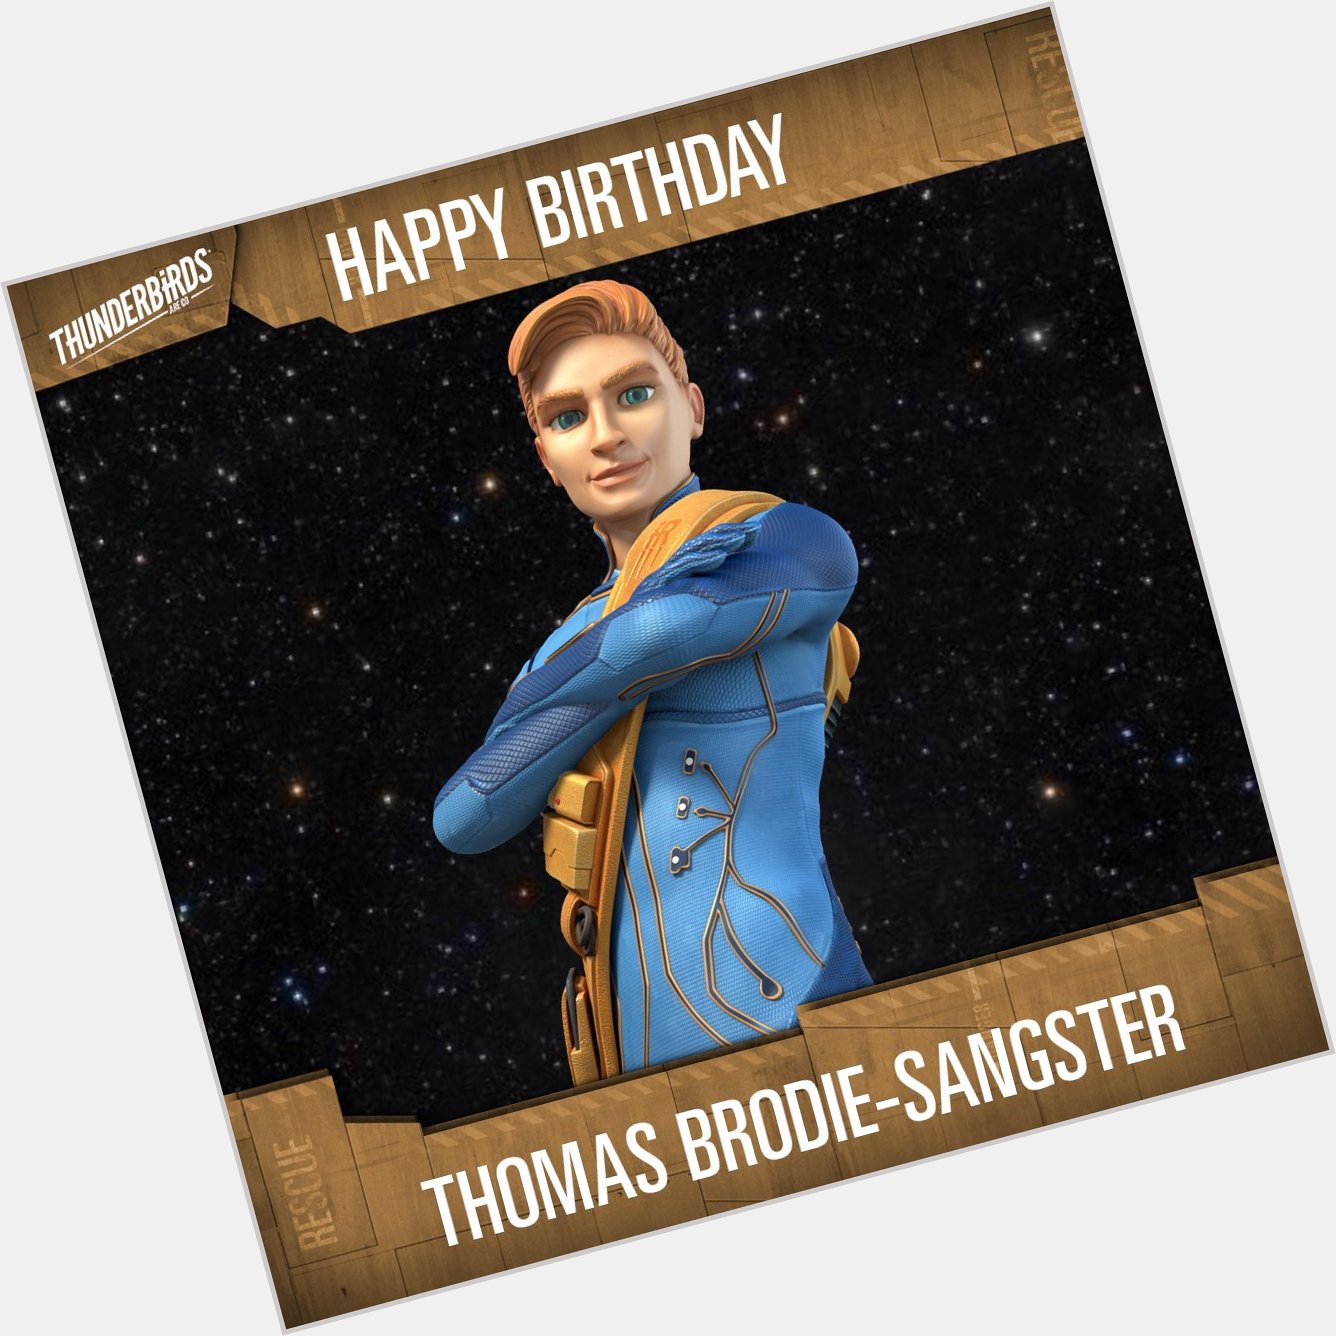 Happy Birthday to Thomas Brodie-Sangster, voice of John Tracy! 